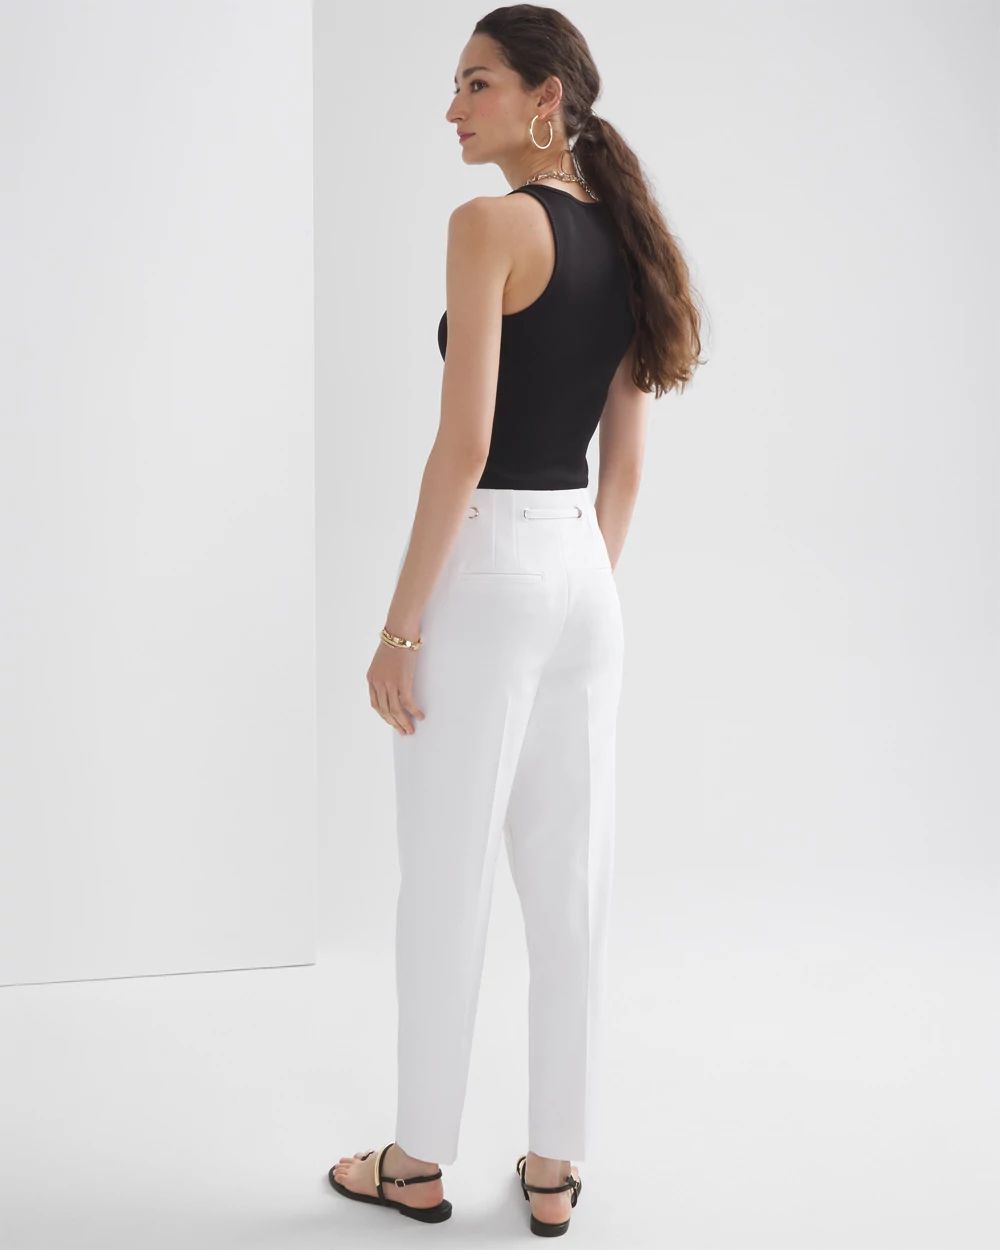 Grommet Tapered Ankle Pants